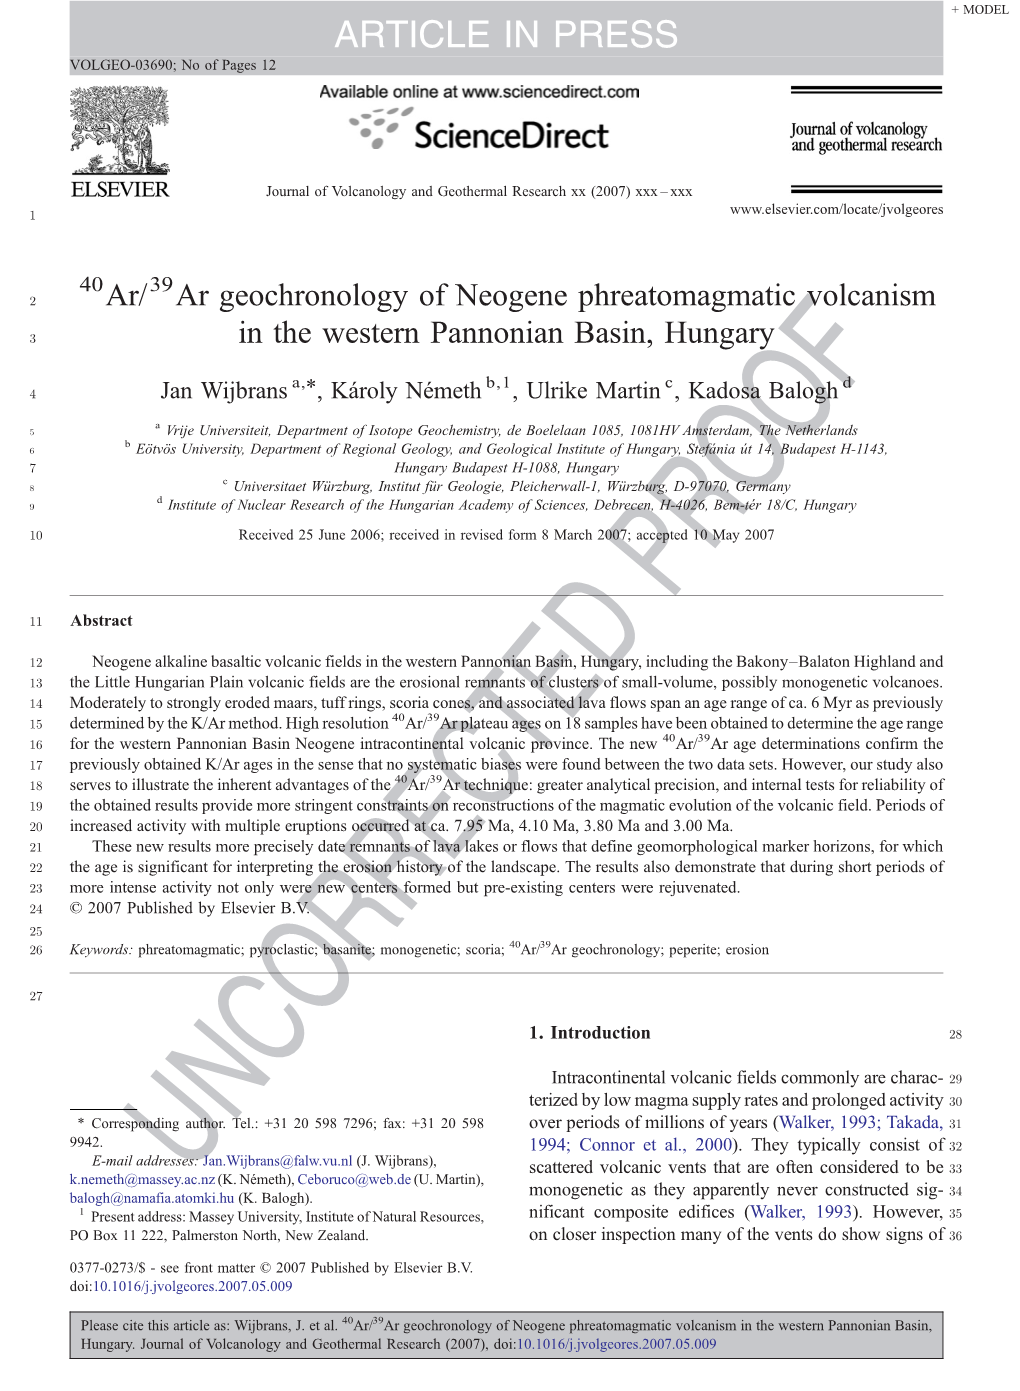 ARTICLE in PRESS + MODEL VOLGEO-03690; No of Pages 12